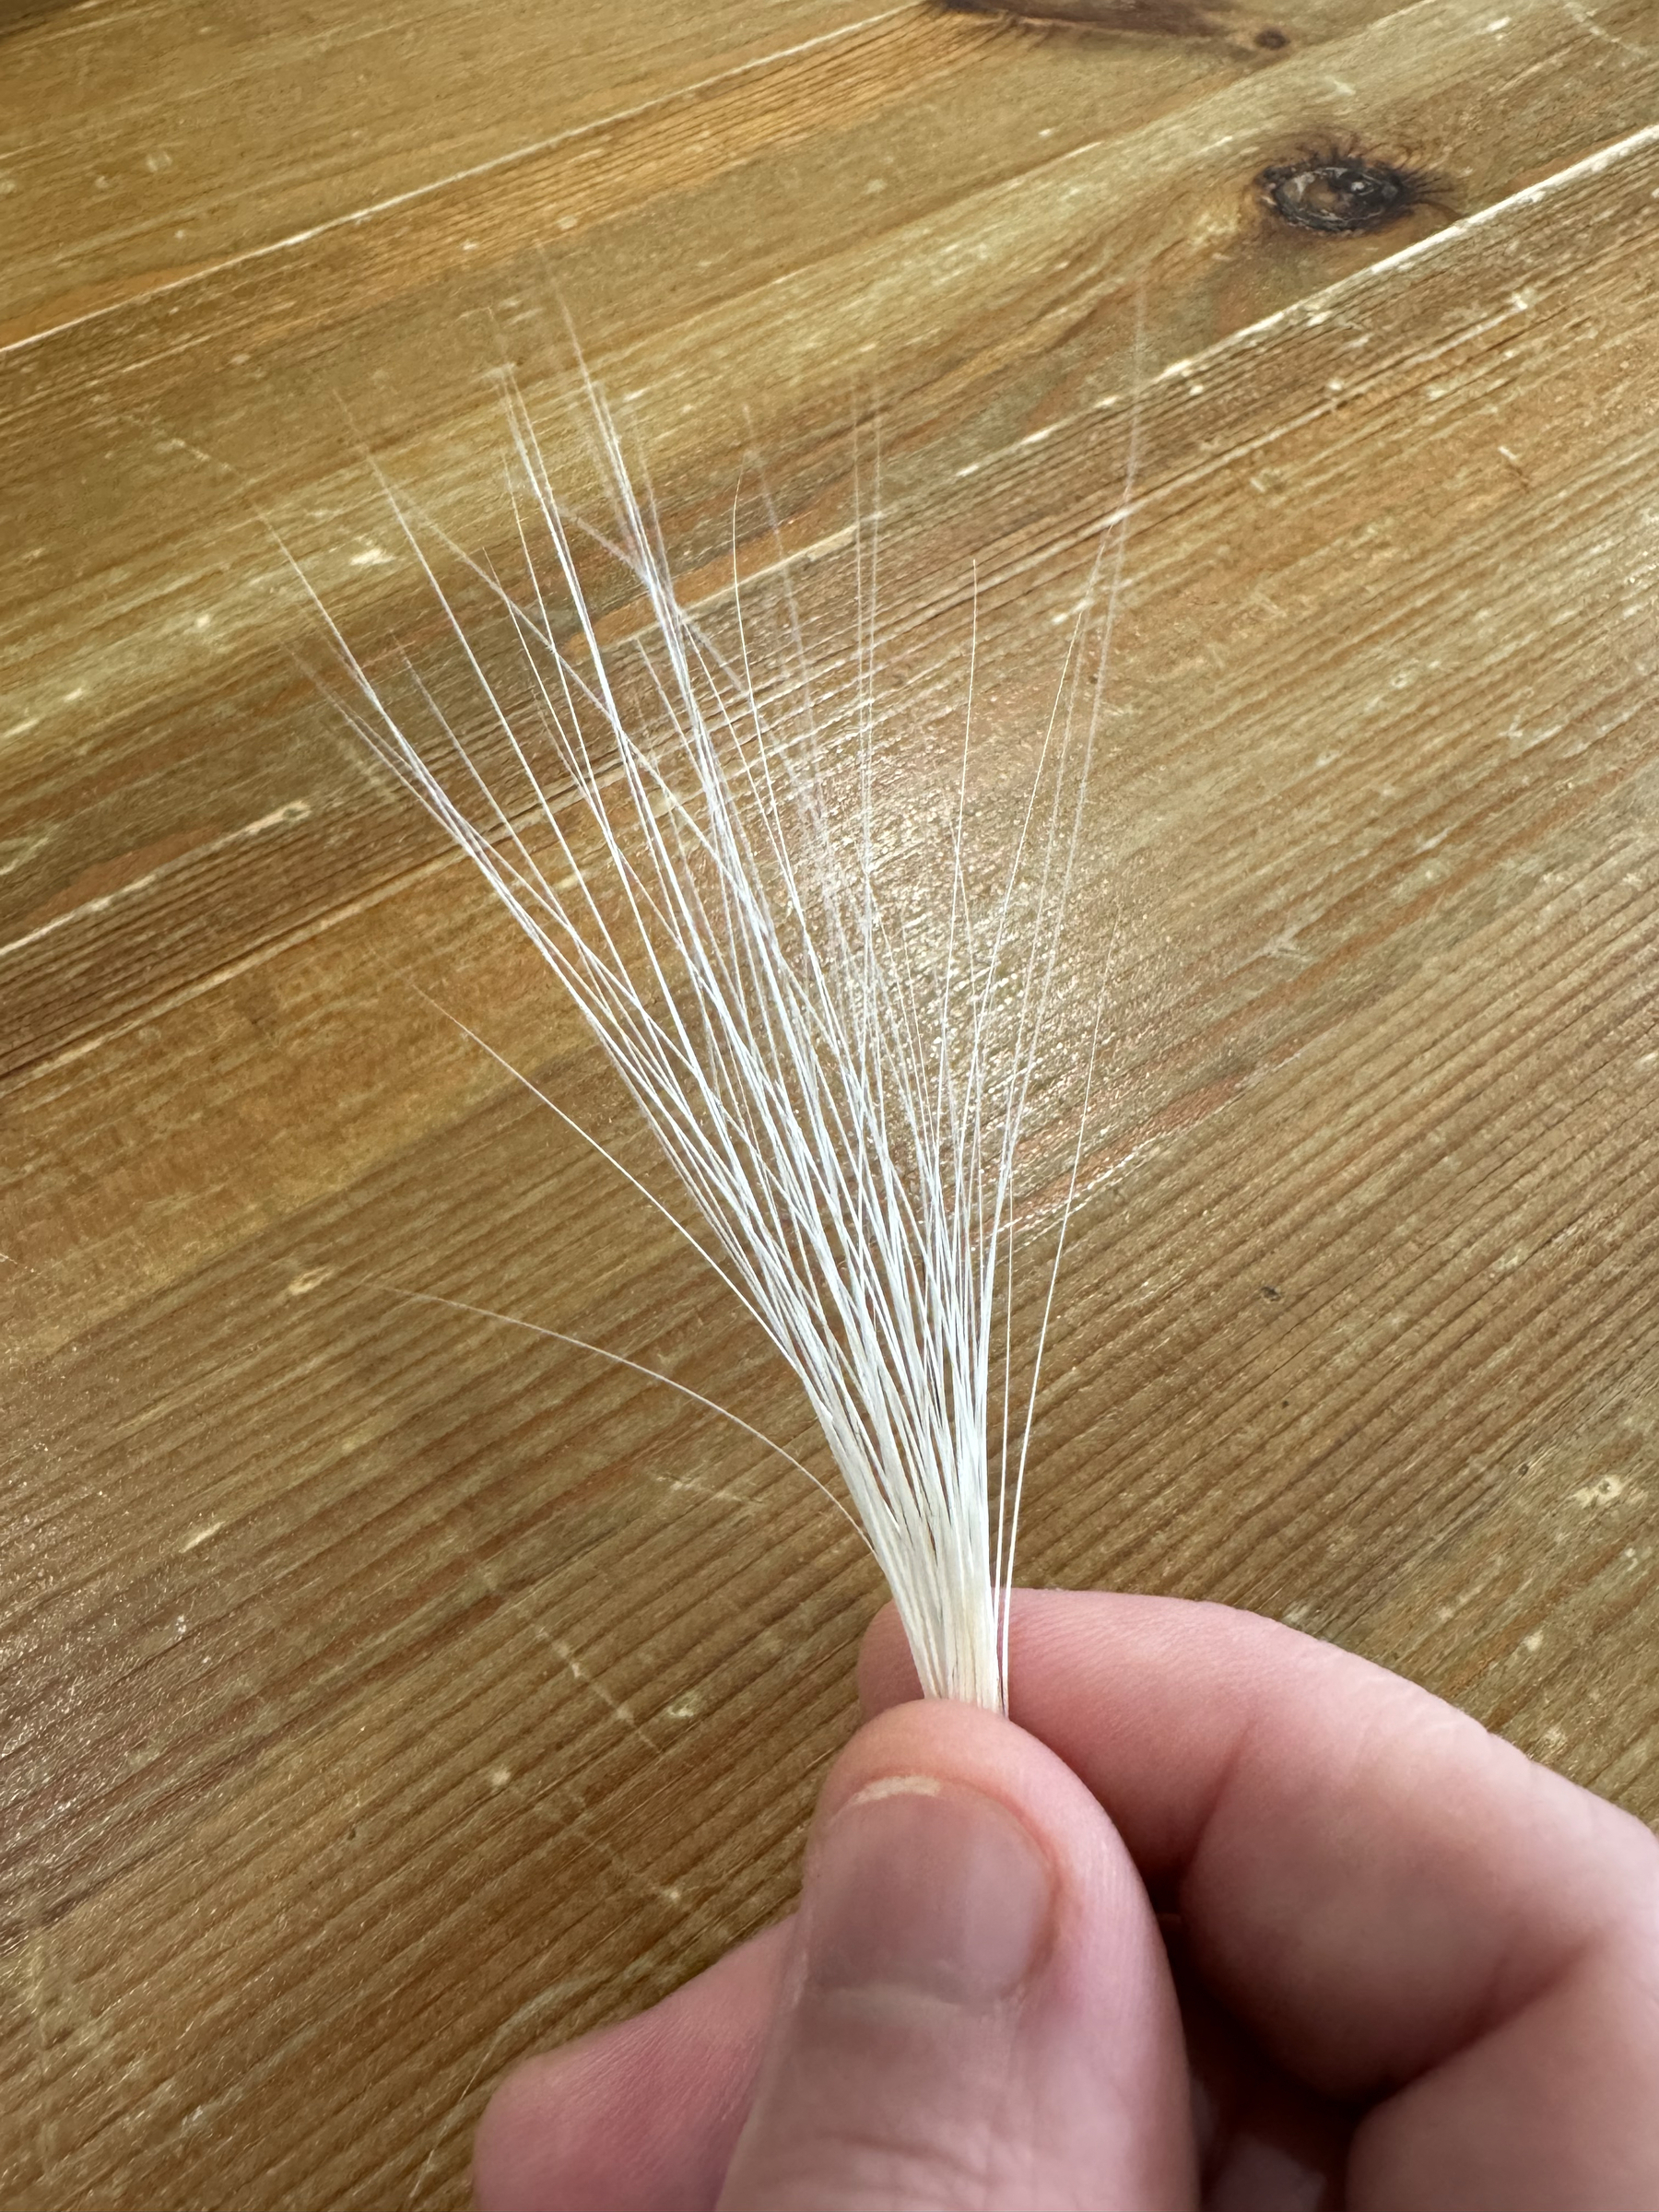 A thick bundle of cat whiskers